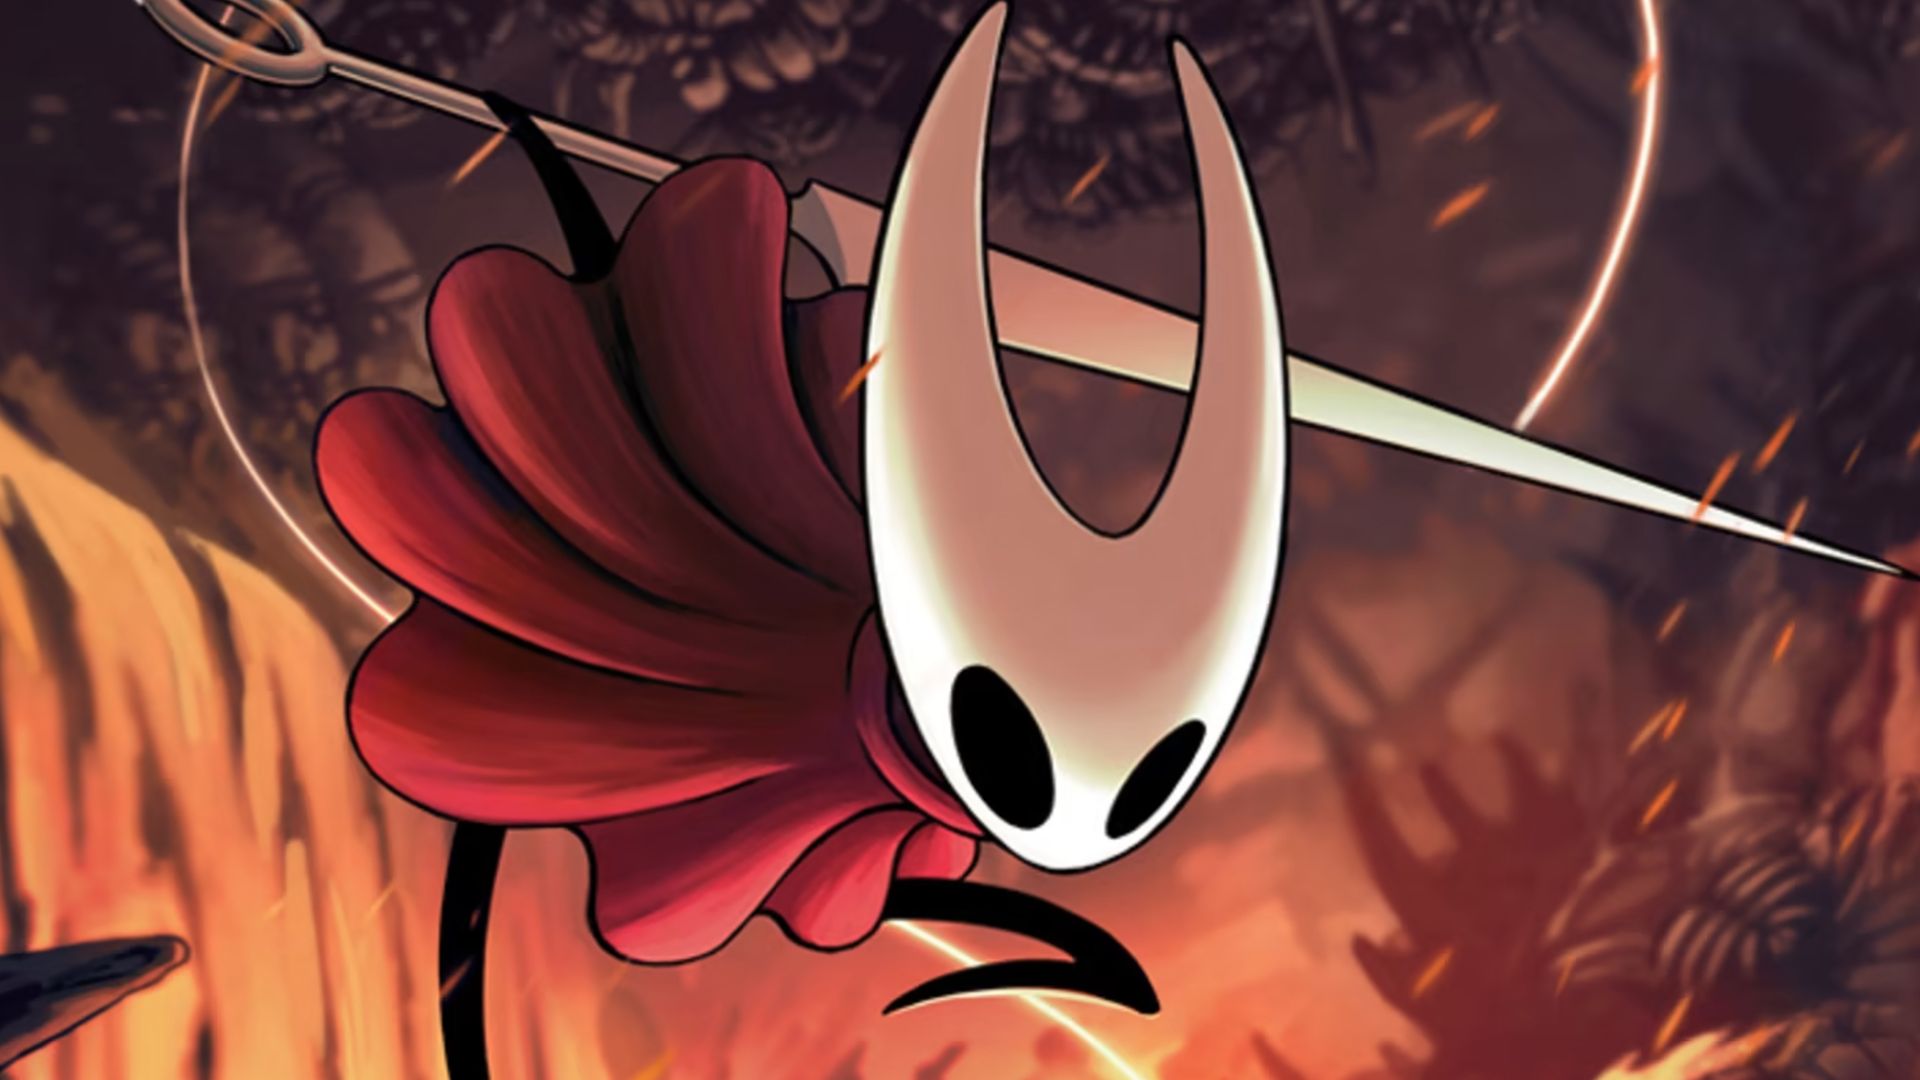 Hornet, the protagonist of Hollow Knight Silksong, swings into action with her signature needle weapon.